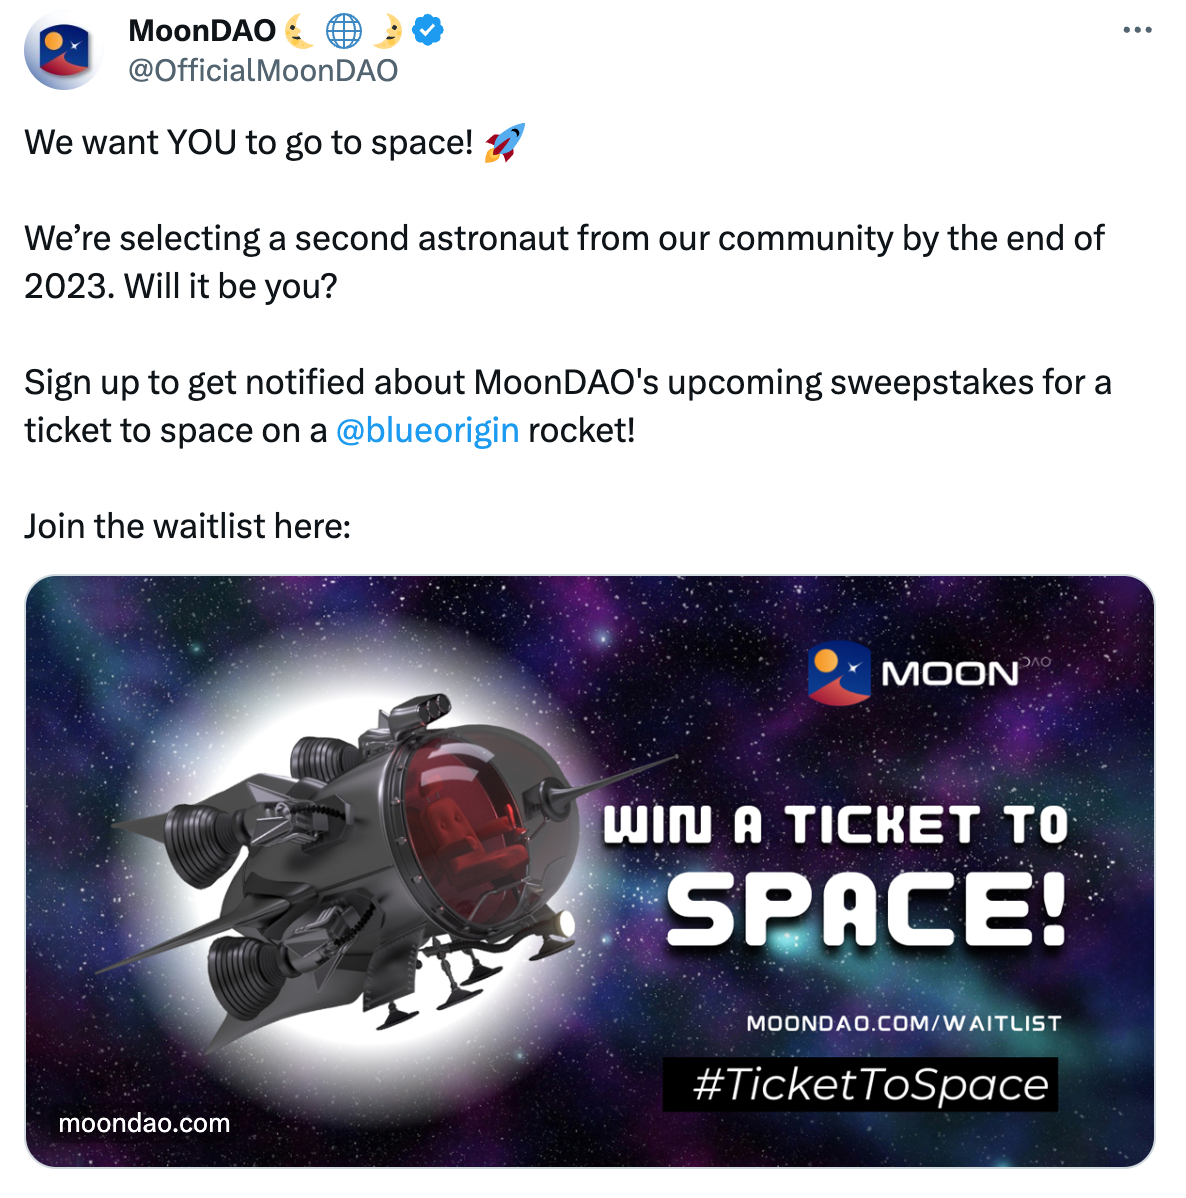 MoonDAO sweepstakes for a ticket to space